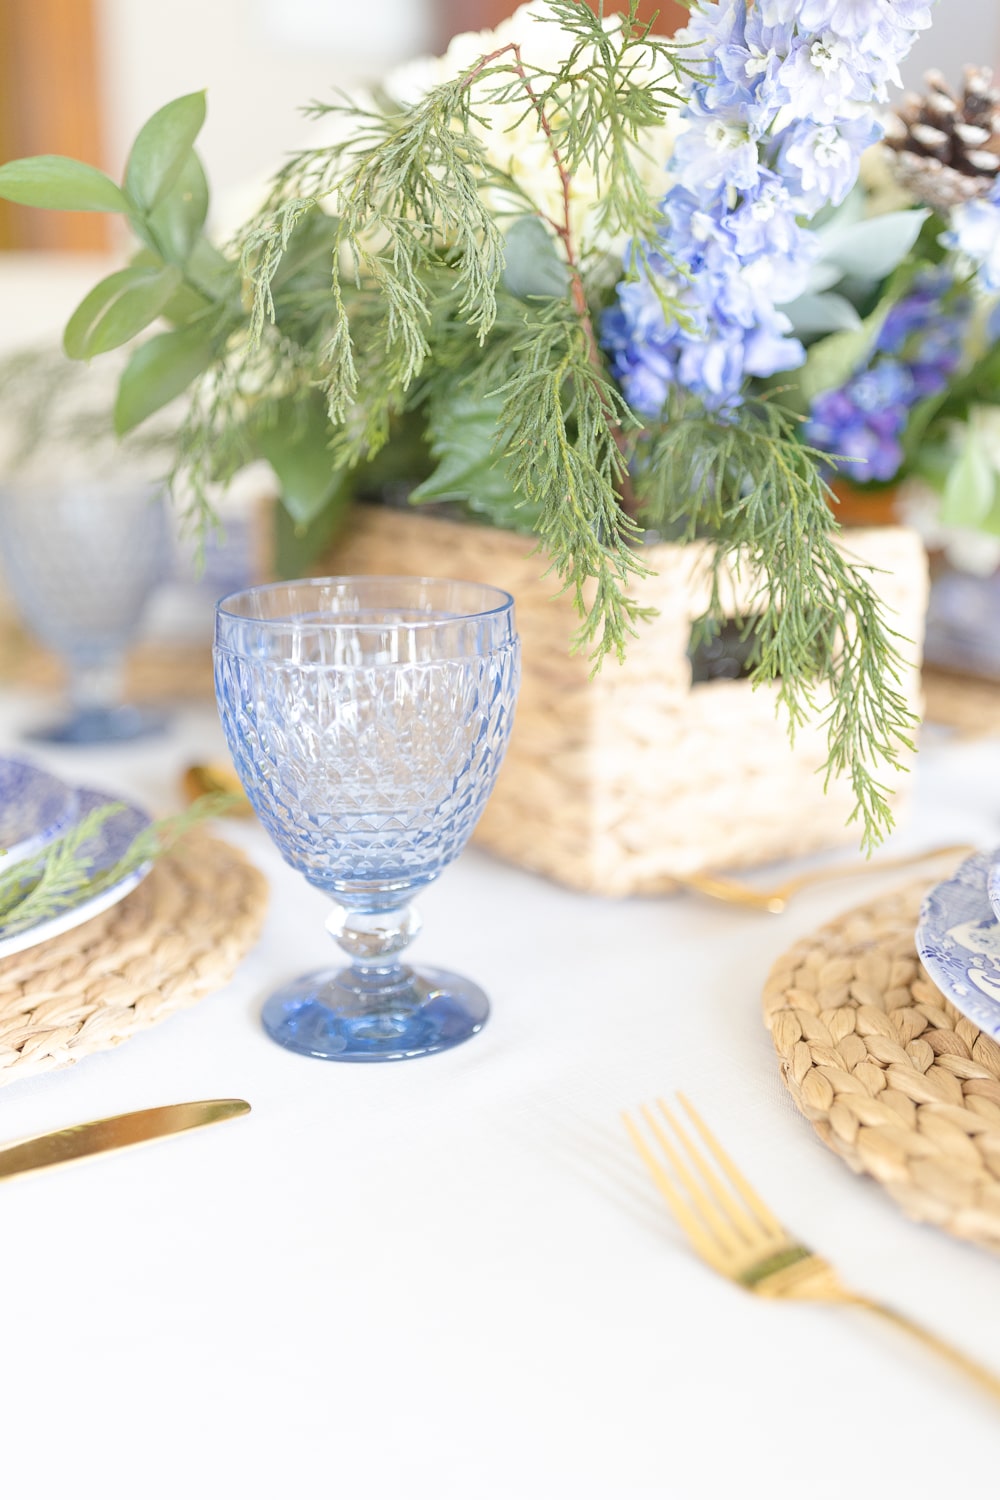 Villeroy and Boch blue goblets styled in a winter table setting by southern lifestyle blogger Stephanie Ziajka on Diary of a Debutante